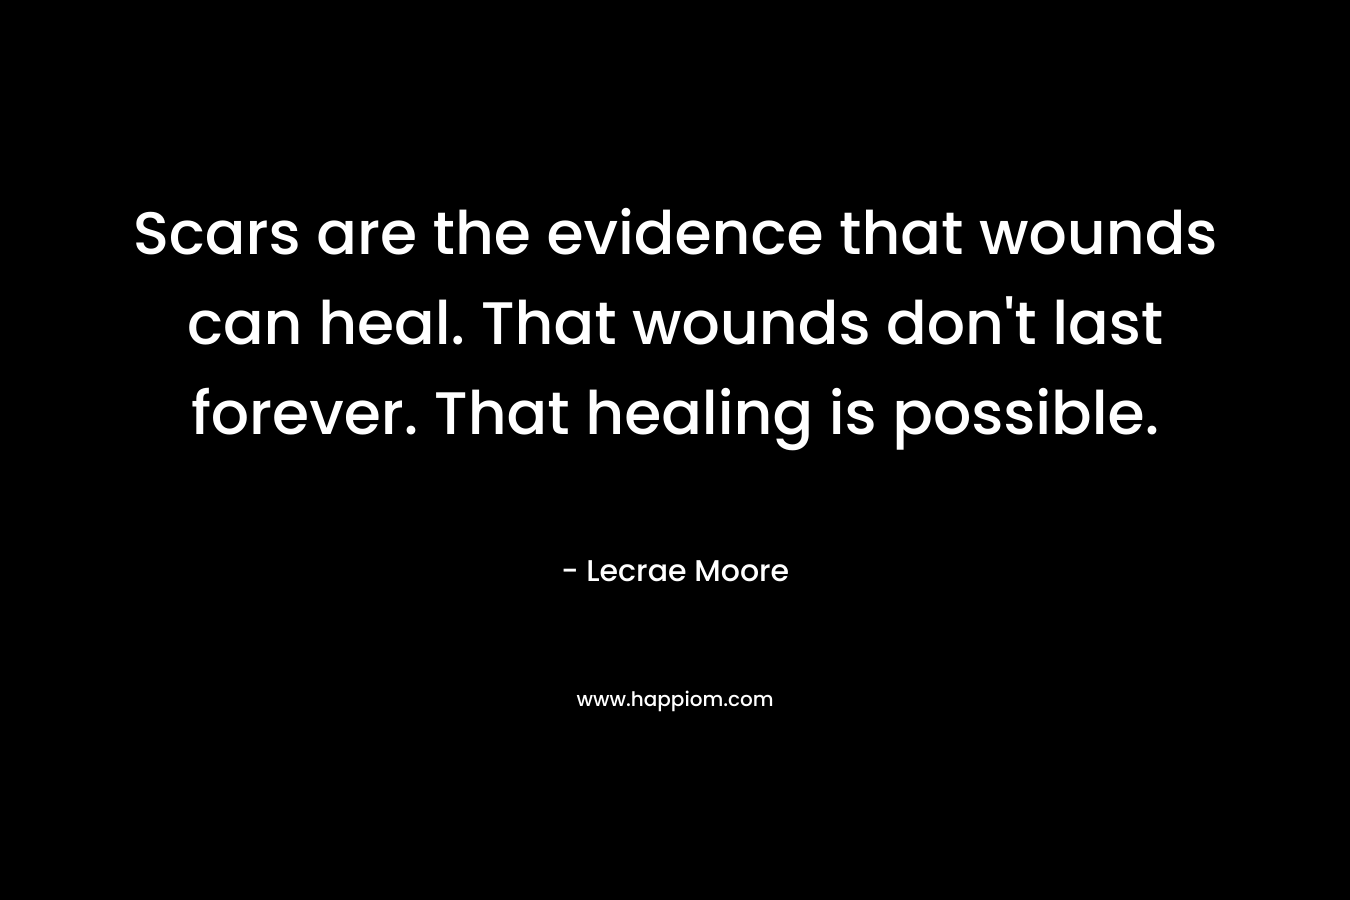 Scars are the evidence that wounds can heal. That wounds don’t last forever. That healing is possible. – Lecrae Moore